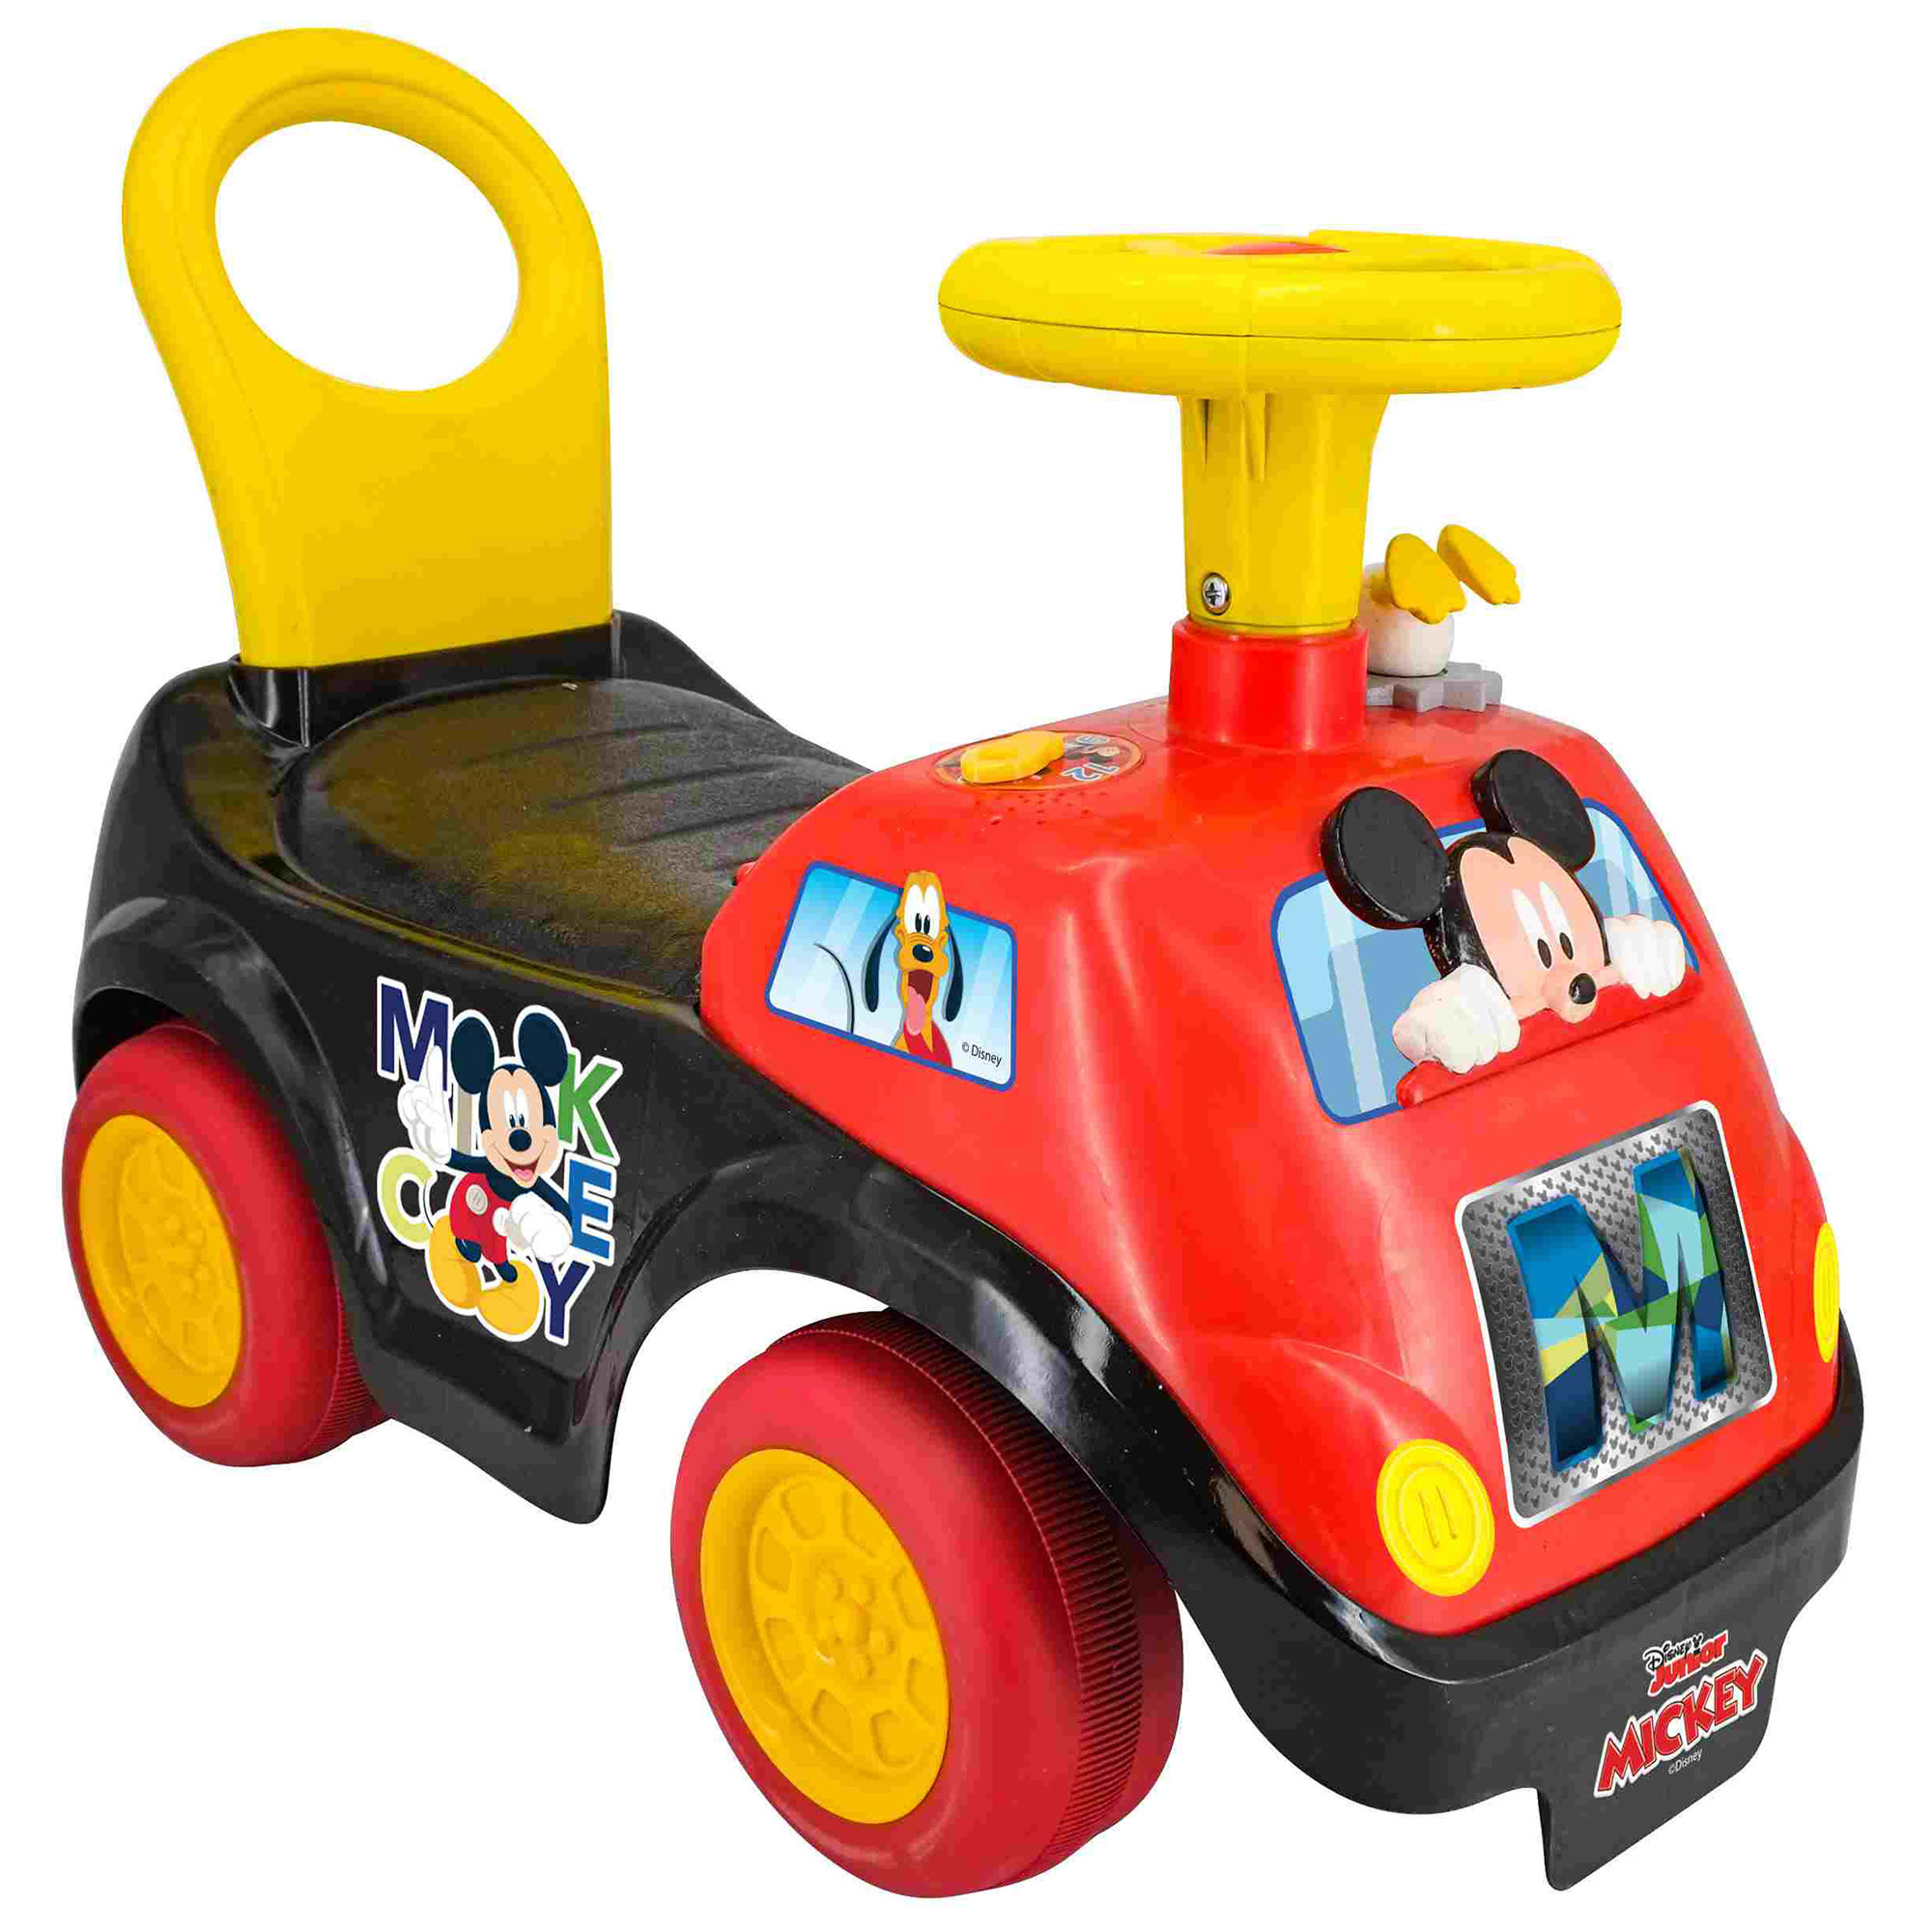 Kiddieland Disney Lights 'N' Sounds Ride-On: Mickey Mouse Kids Interactive Push Toy Car, Foot To Floor, Toddlers, Ages 12-36 Months - image 3 of 5